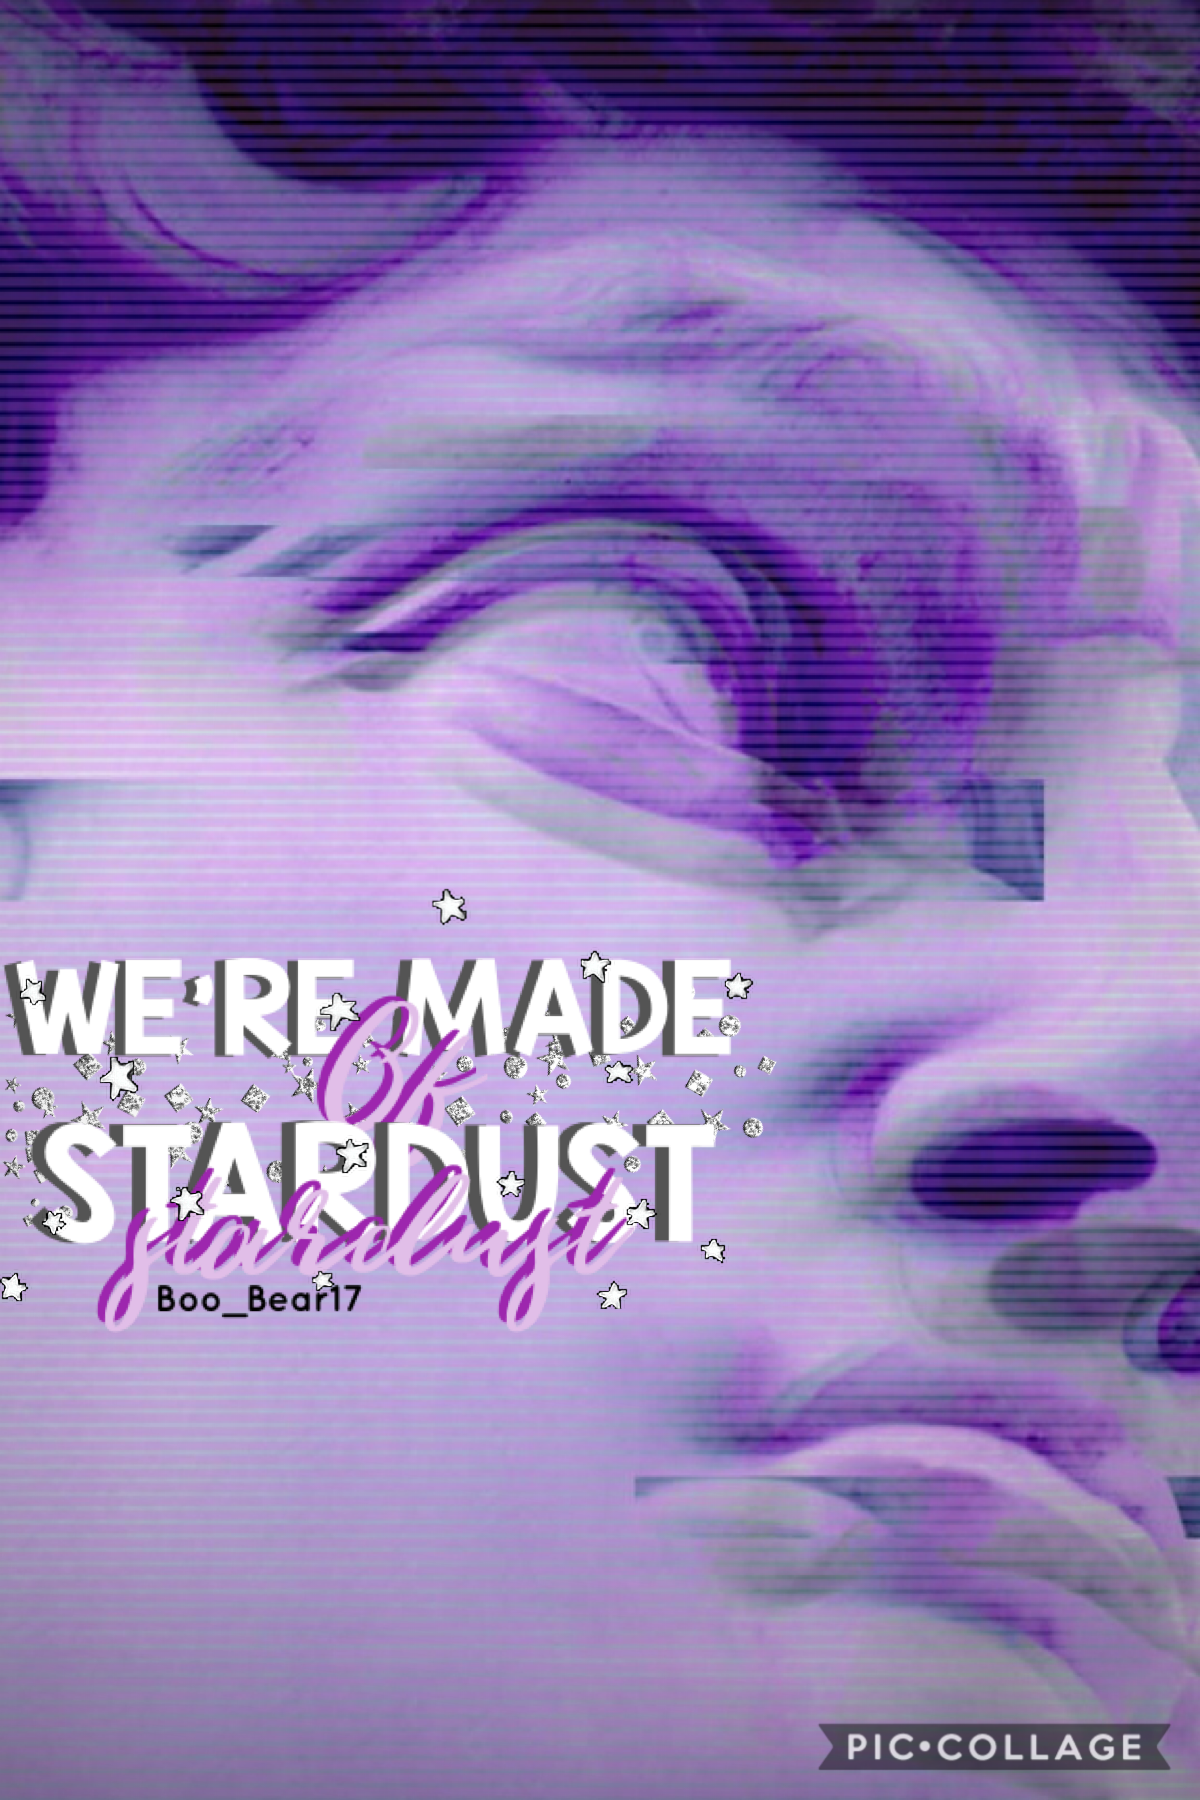 ☂️we’re made of stardust☂️
•low key flirting with a coworker to take my mind of my crush who rejected me lol
•song rec: Hot Shower by Chance the Rapper